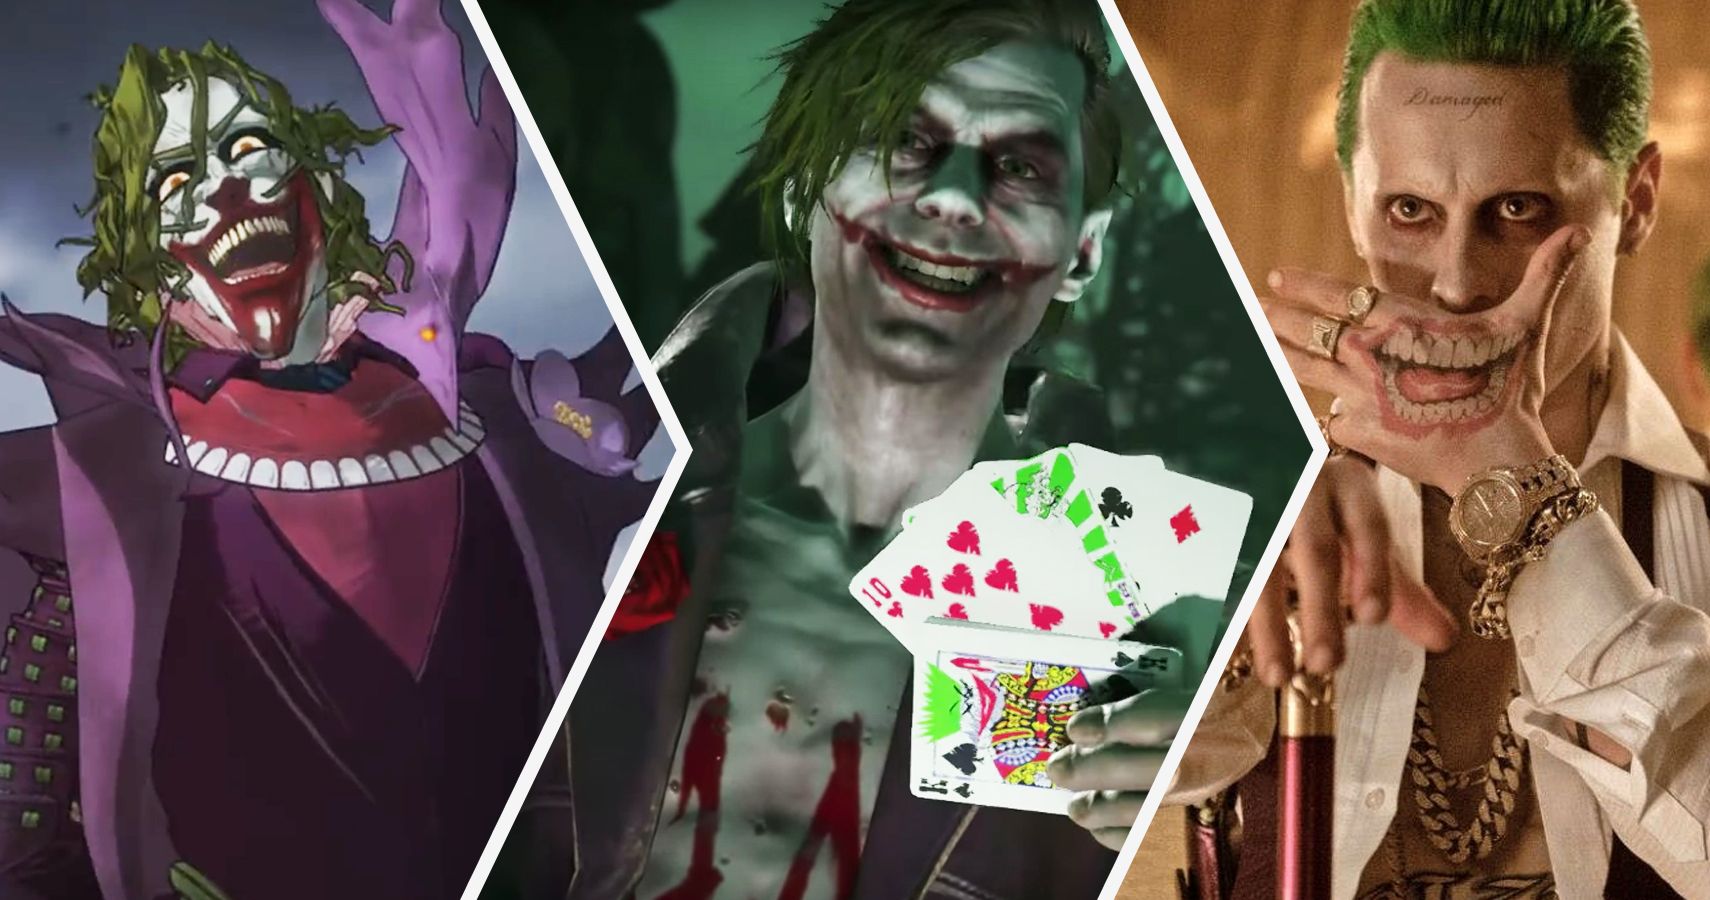 Our Definitive Ranking Of The Jokers, From Jack Nicholson To Joaquin ...